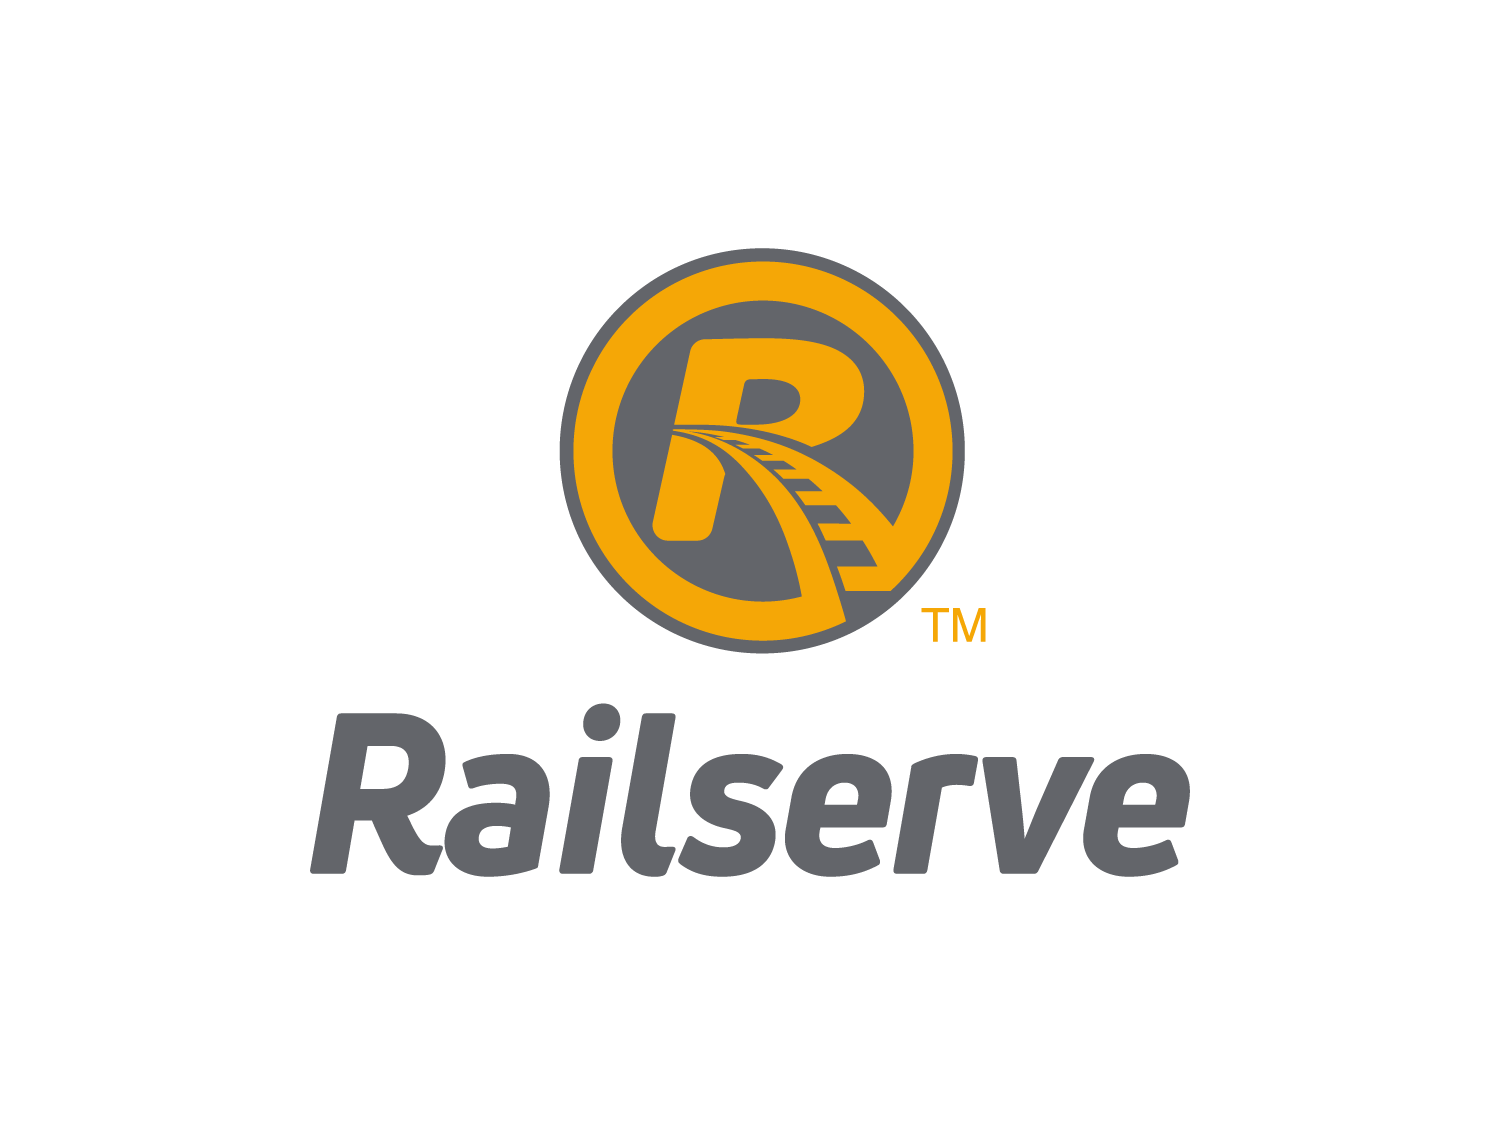 Railserve is the leading provider of in-plant rail switching and associated services — operating over 80 locations in the US and Canada.